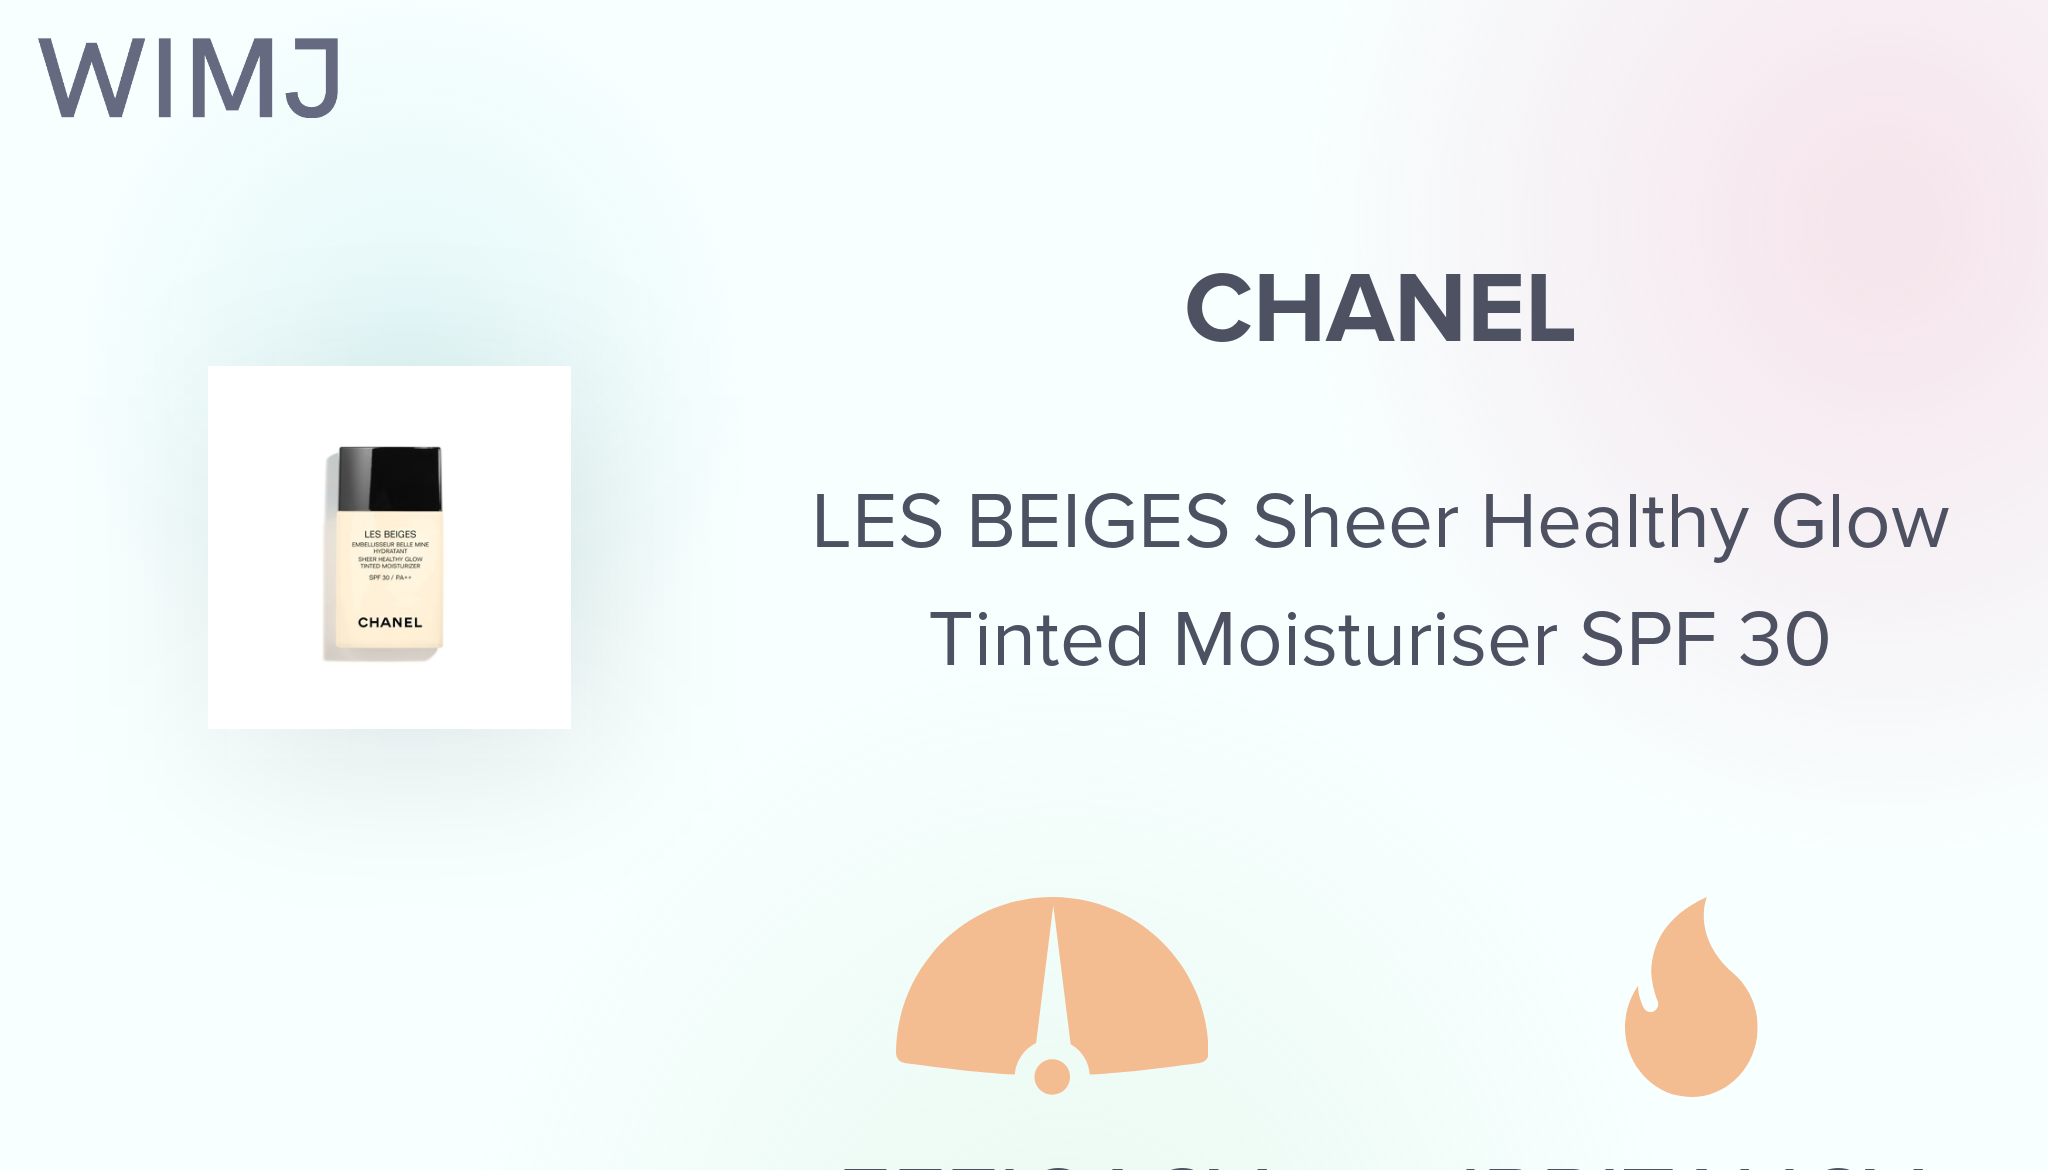 chanel les beiges sheer healthy glow moisturizing tint